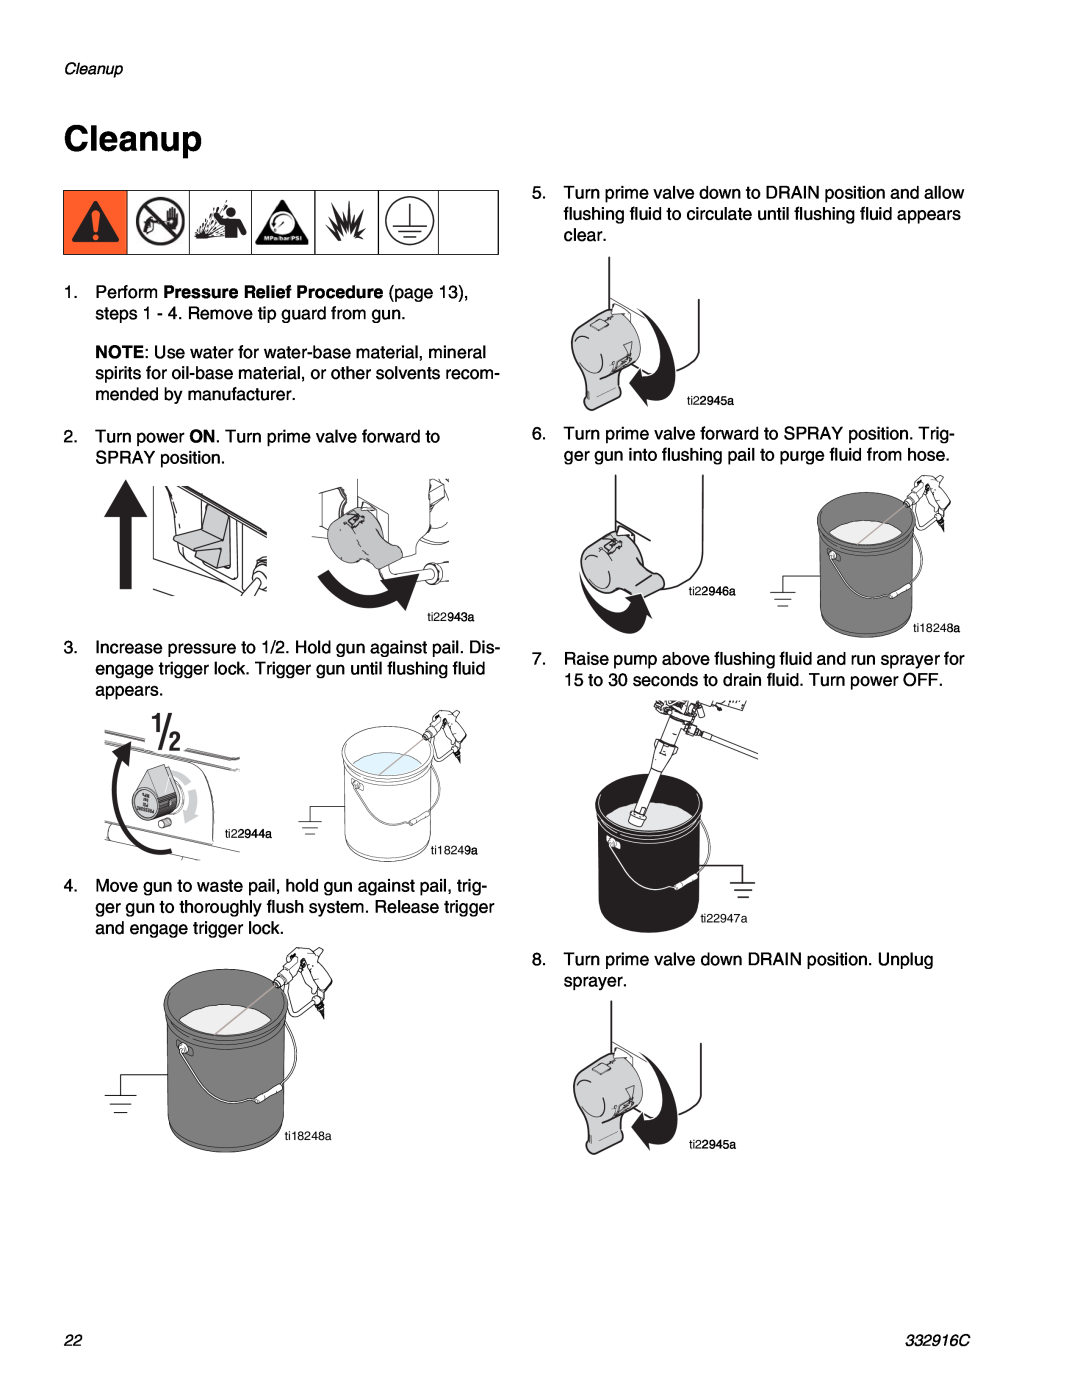 Graco 1095, Mark VII, Mark IV, Mark X, 795, 695, 1595 important safety instructions Cleanup 